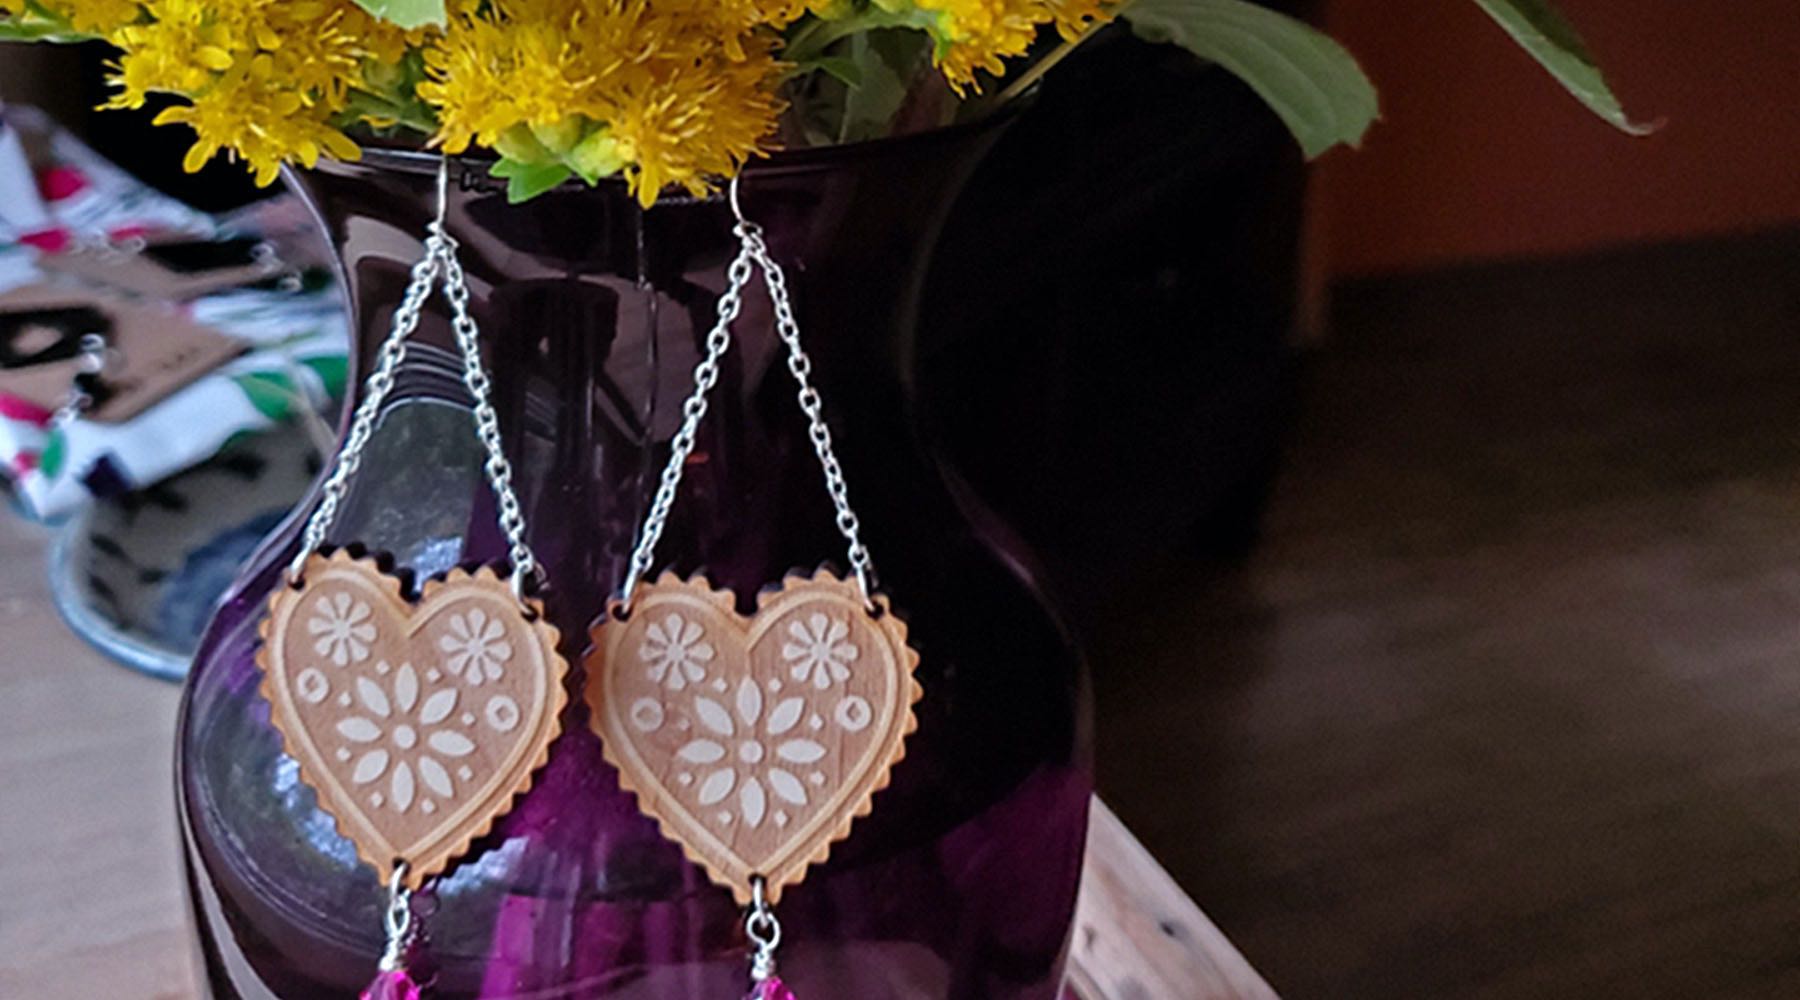 A pair of our beautiful custom made Folkloric earrings made from laser cut and engraved maple sith Stirling findings and a Swarovski crystal drop displayed on a vase with spring flowers. Were always working on new handcrafted goods. 